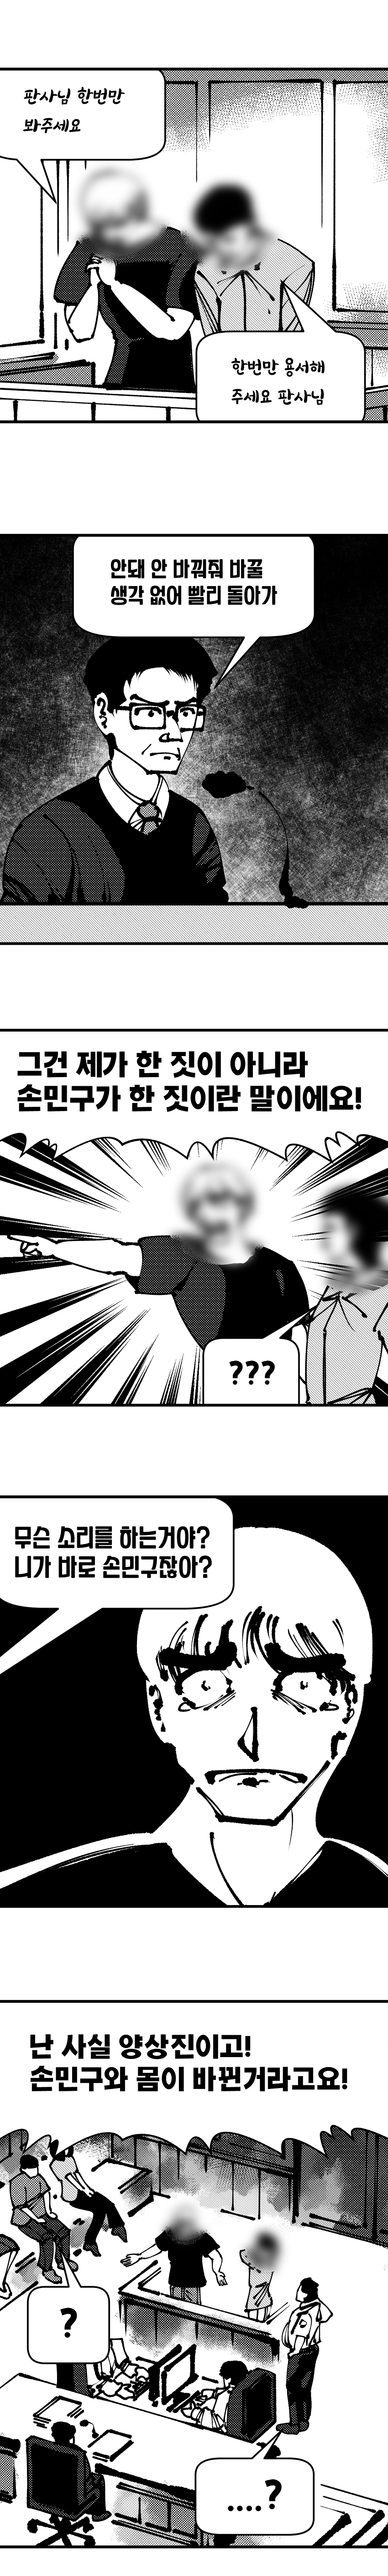 24post.co.kr_026.png